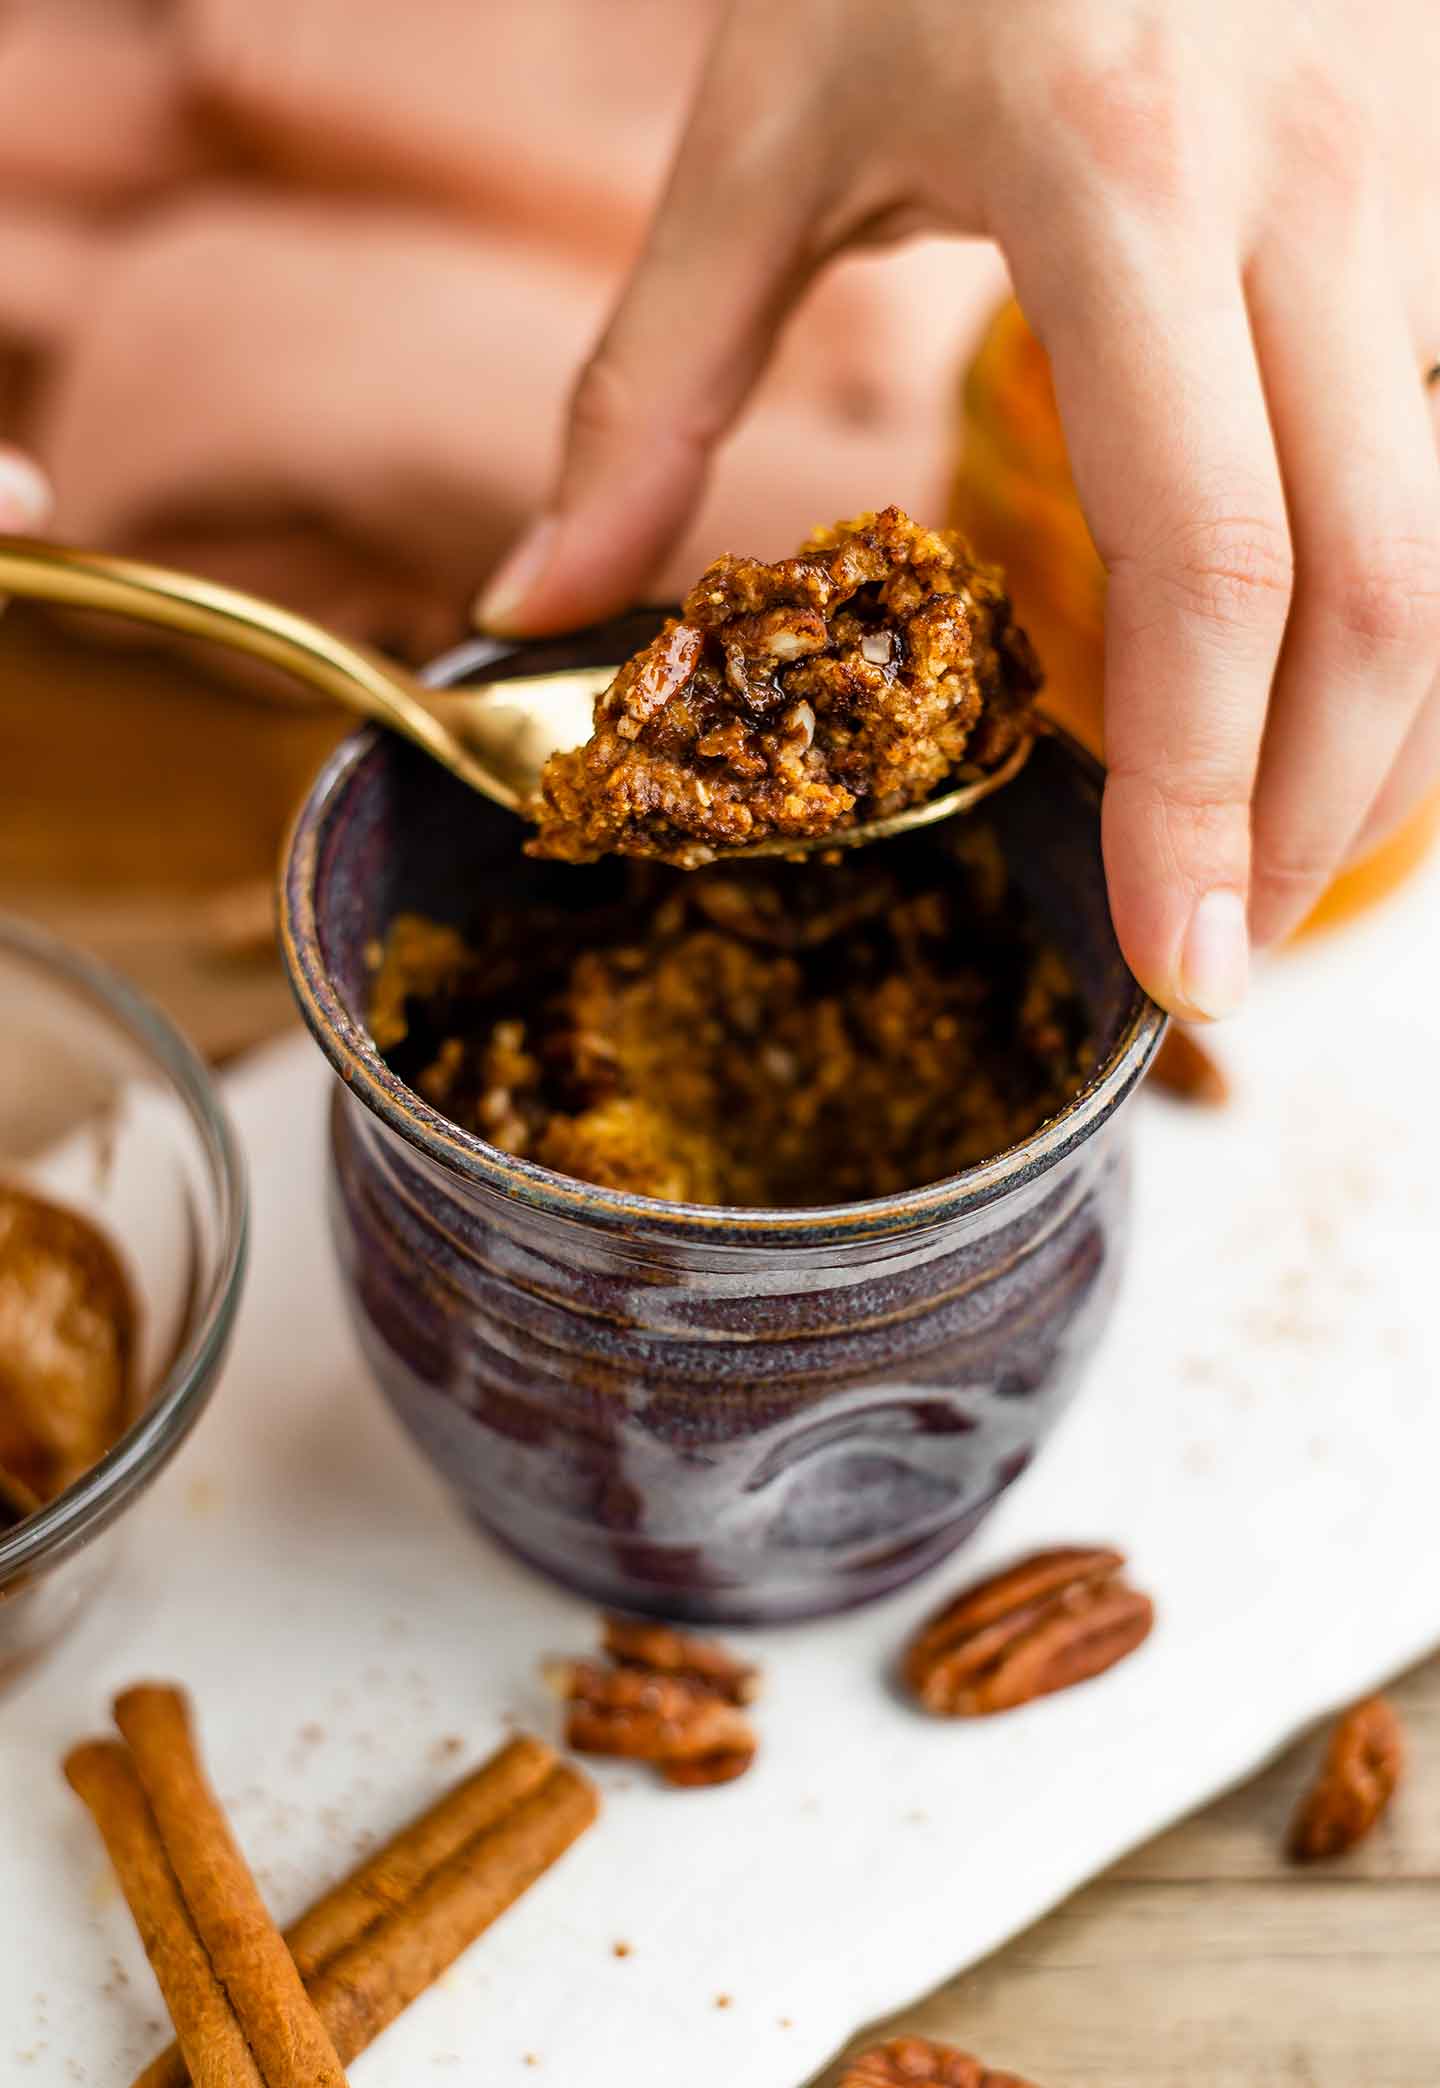 Side view of a hand holding a scoop of warm pumpkin spice mug cake on a spoon. Crushed pecans and a maple cinnamon drizzle are visible.